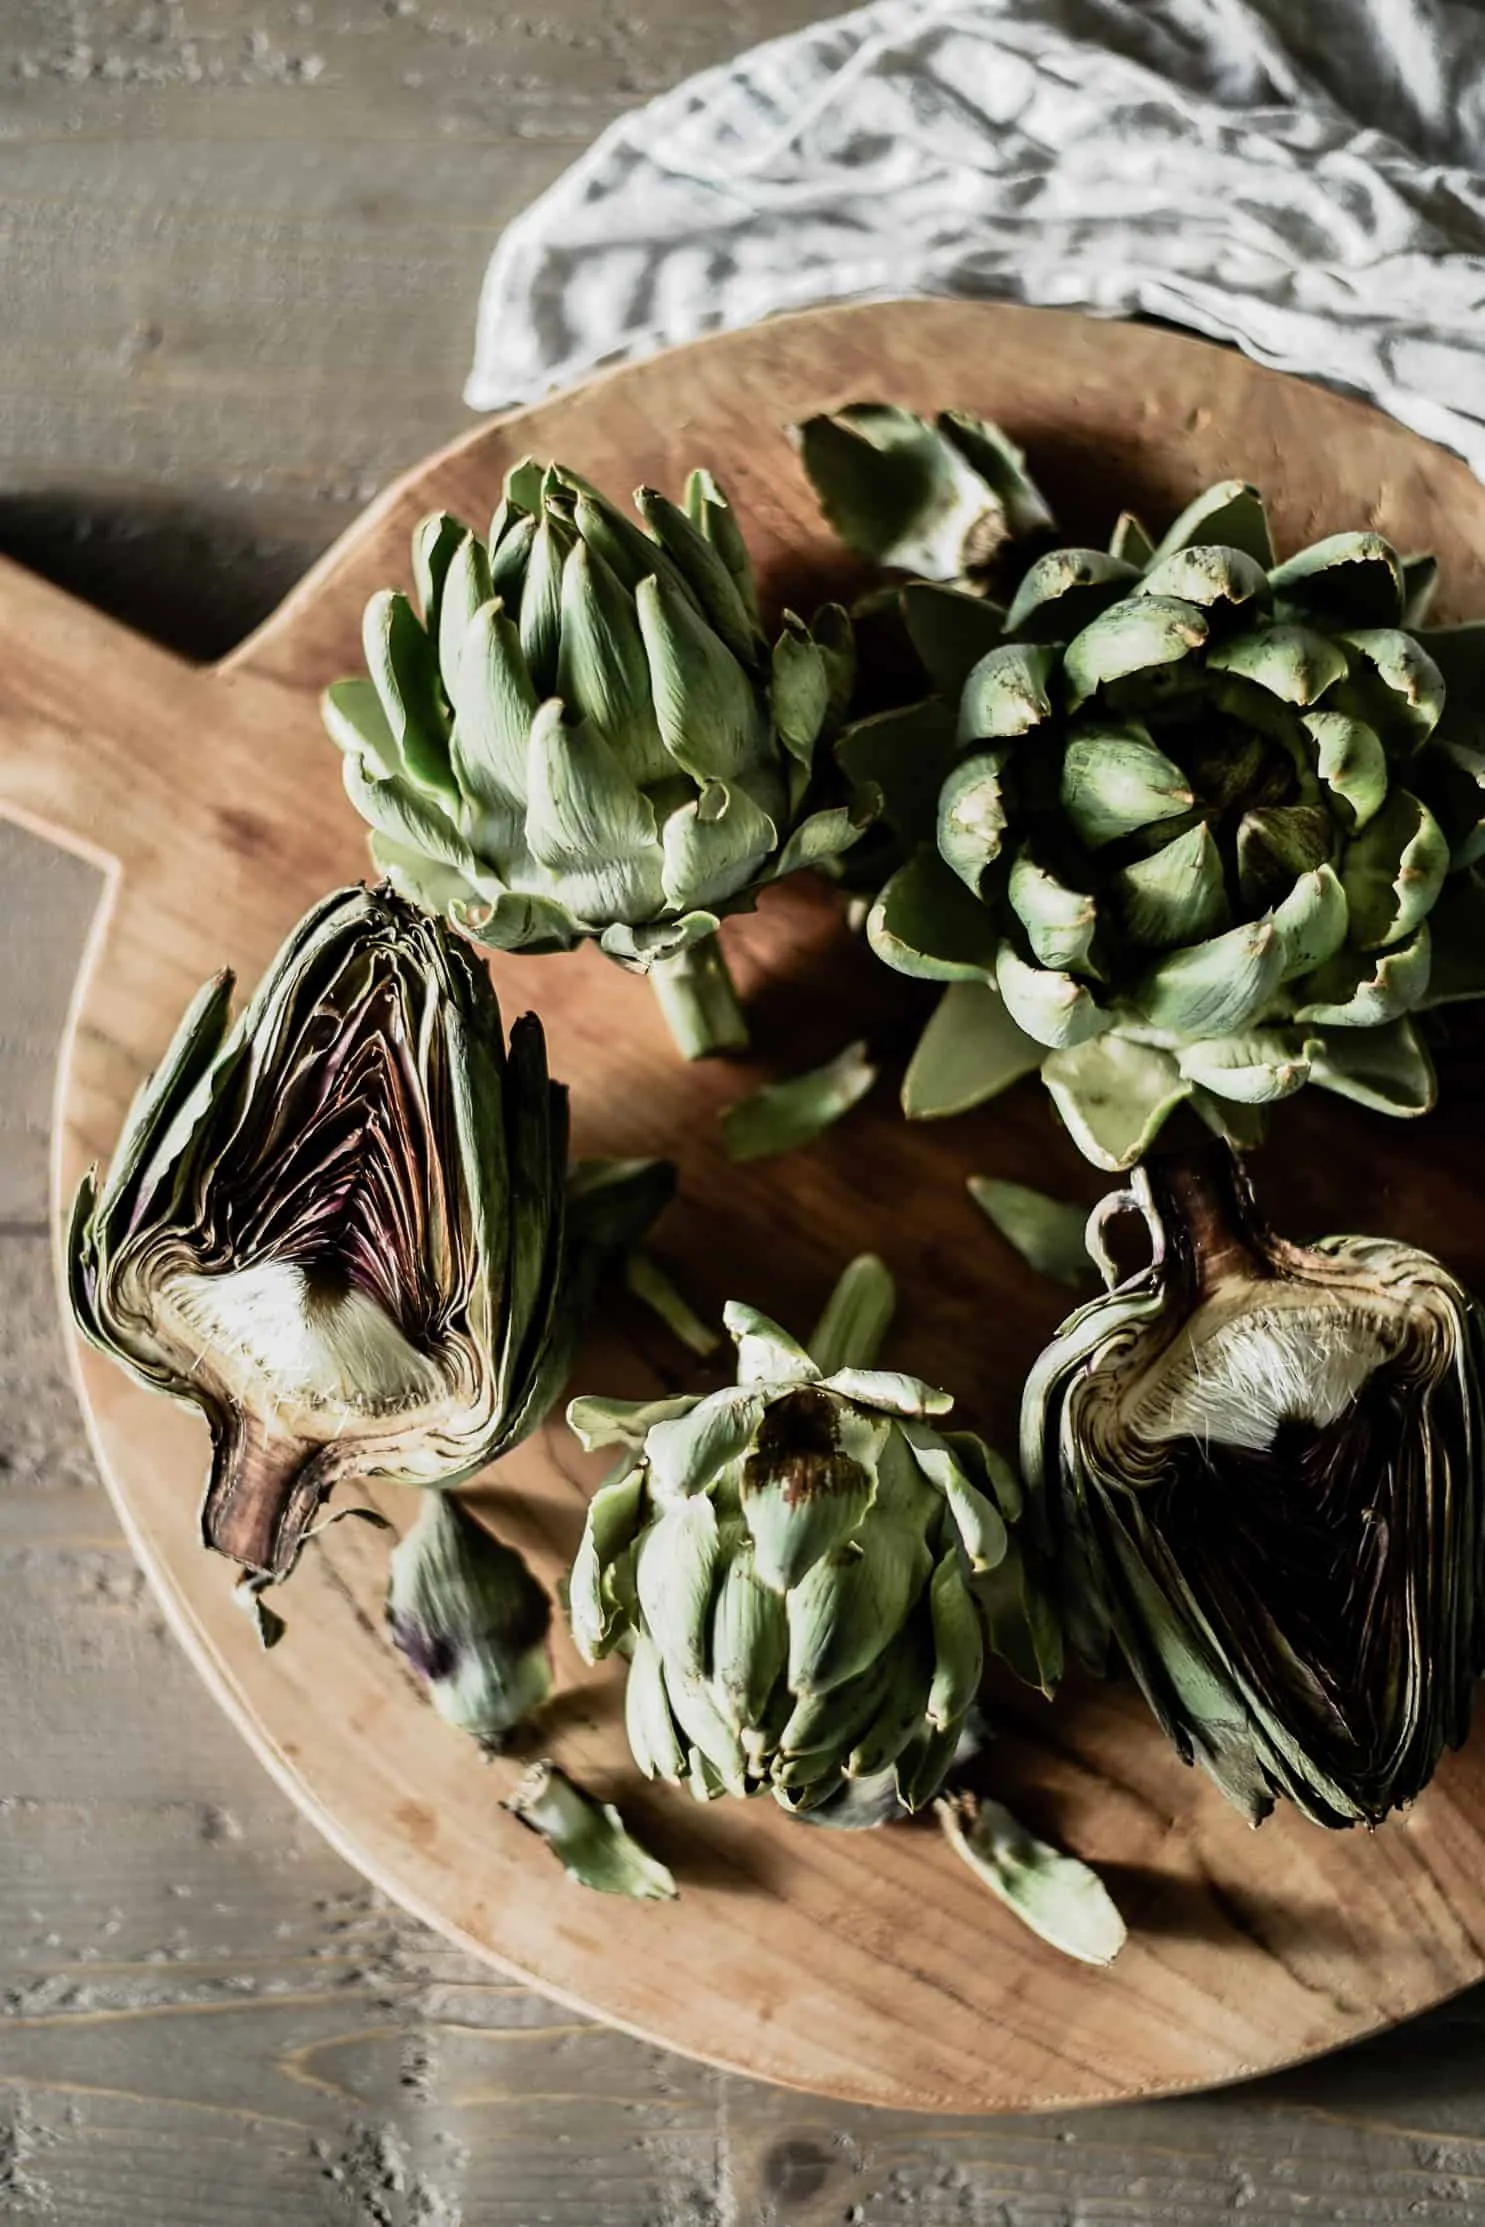 Artichokes are a hearty vegetable that can be grown in any climate, and enjoyed throughout fall! Follow this guide to learn how to grow artichokes in your garden! 